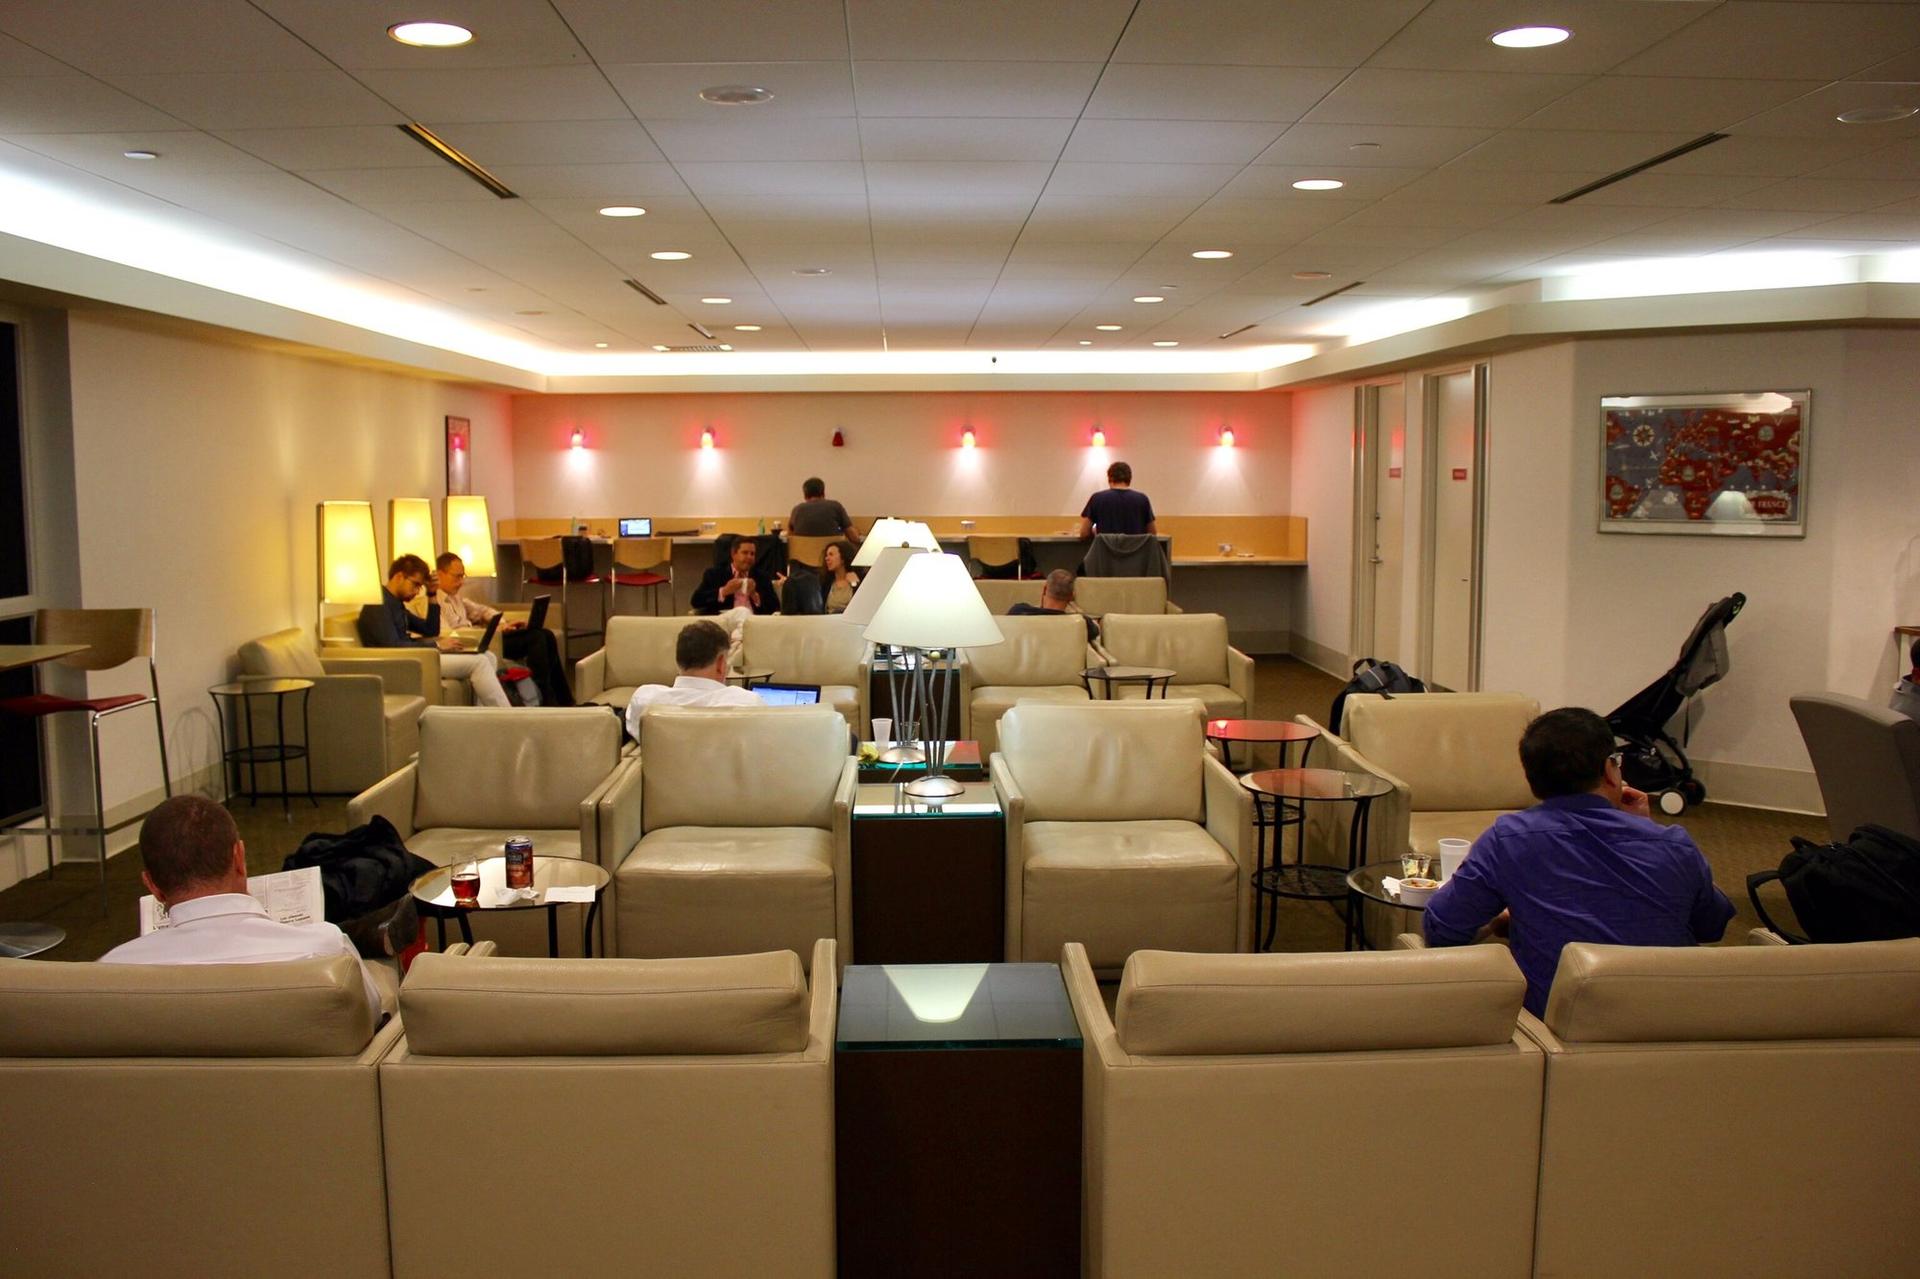 Air France Lounge image 1 of 26